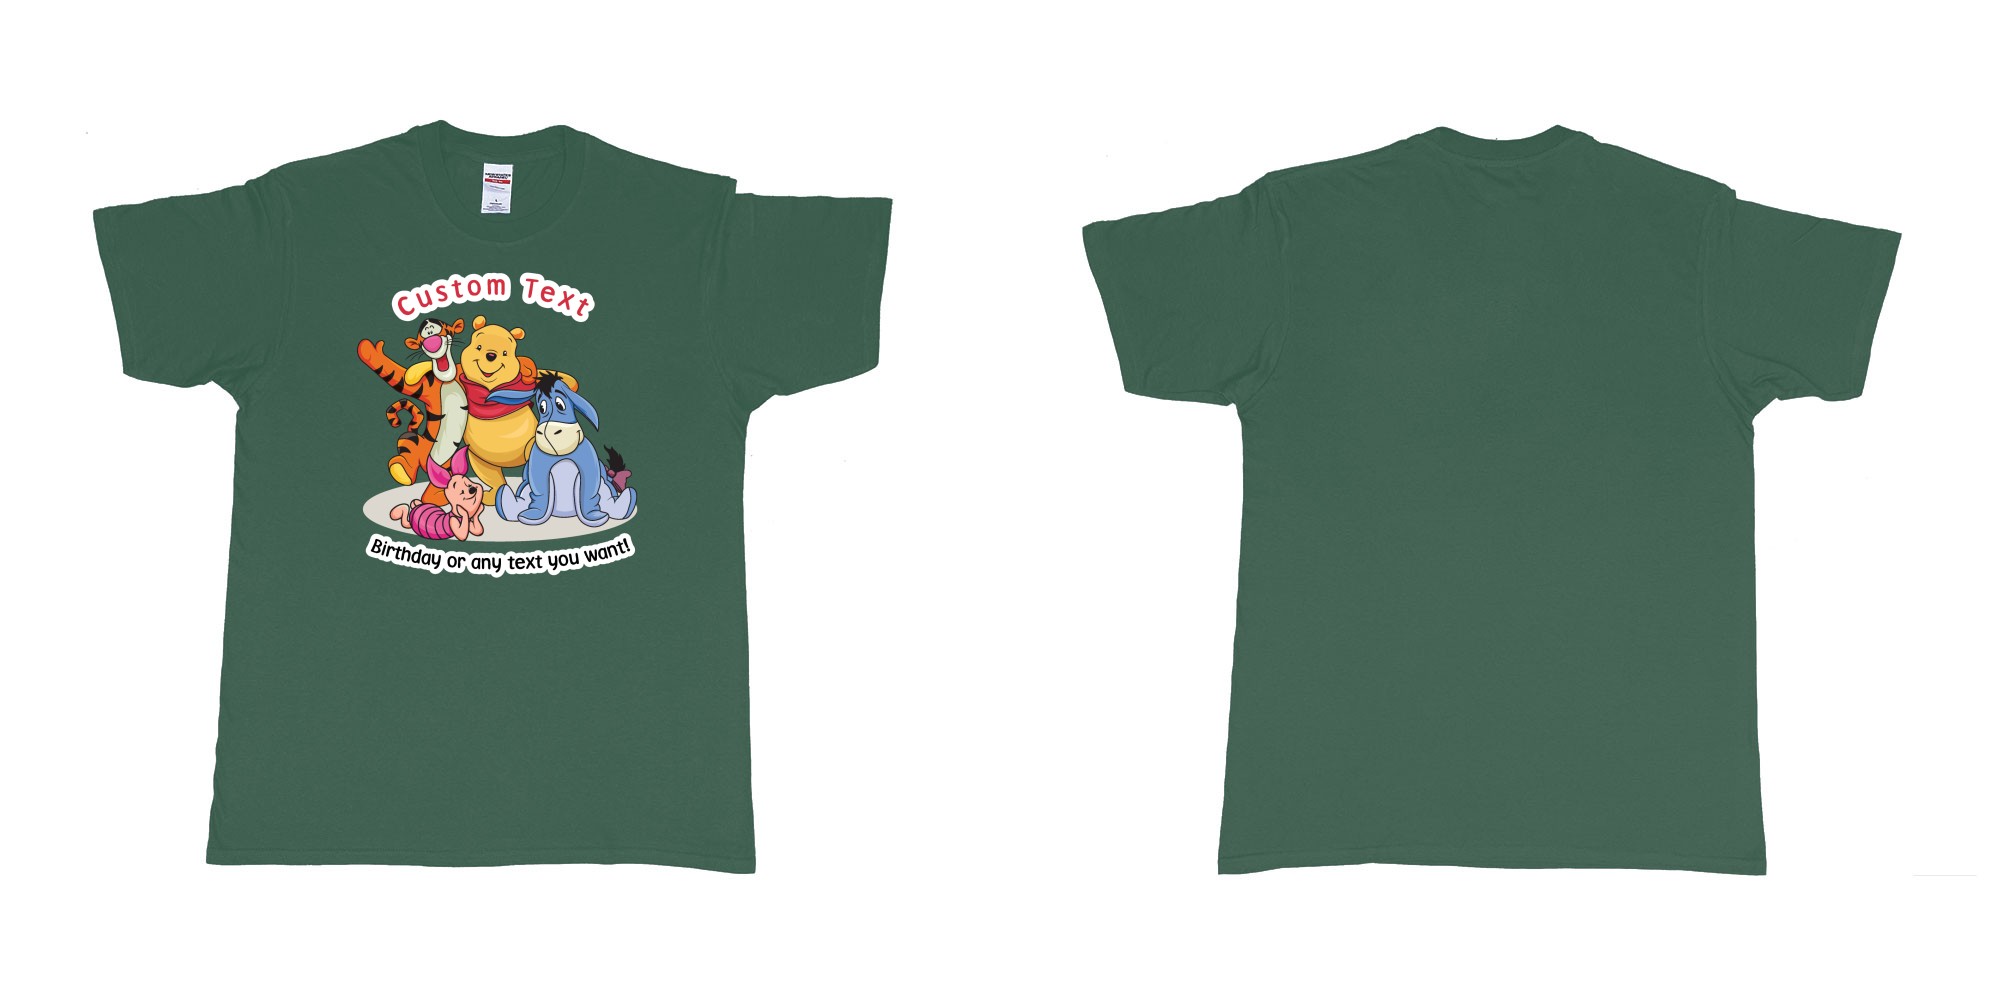 Custom tshirt design winnie the pooh and friend in fabric color forest-green choice your own text made in Bali by The Pirate Way